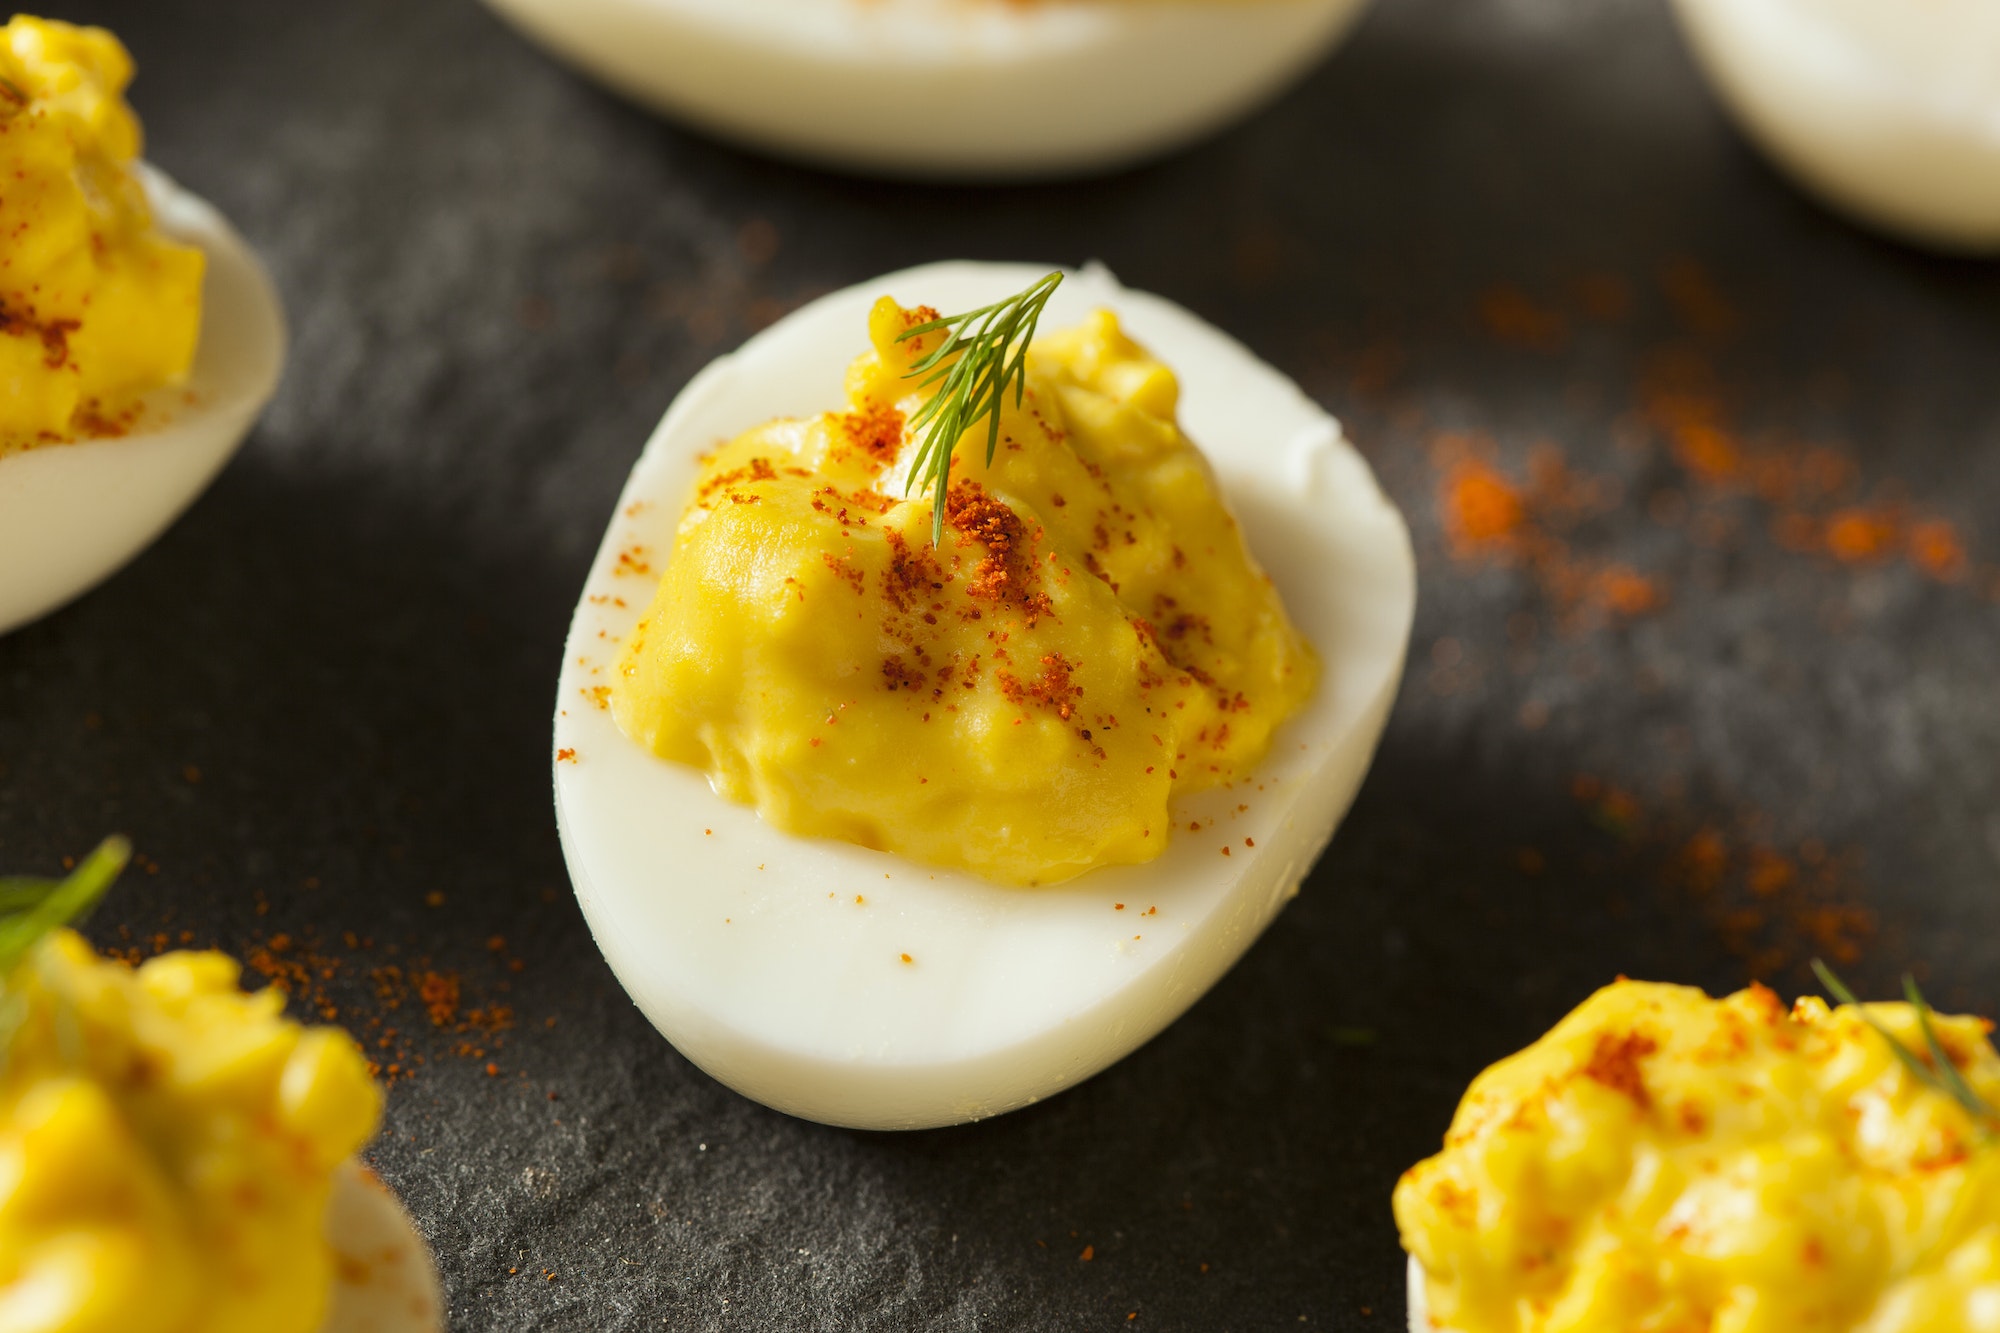 Homemade Spicy Deviled Eggs